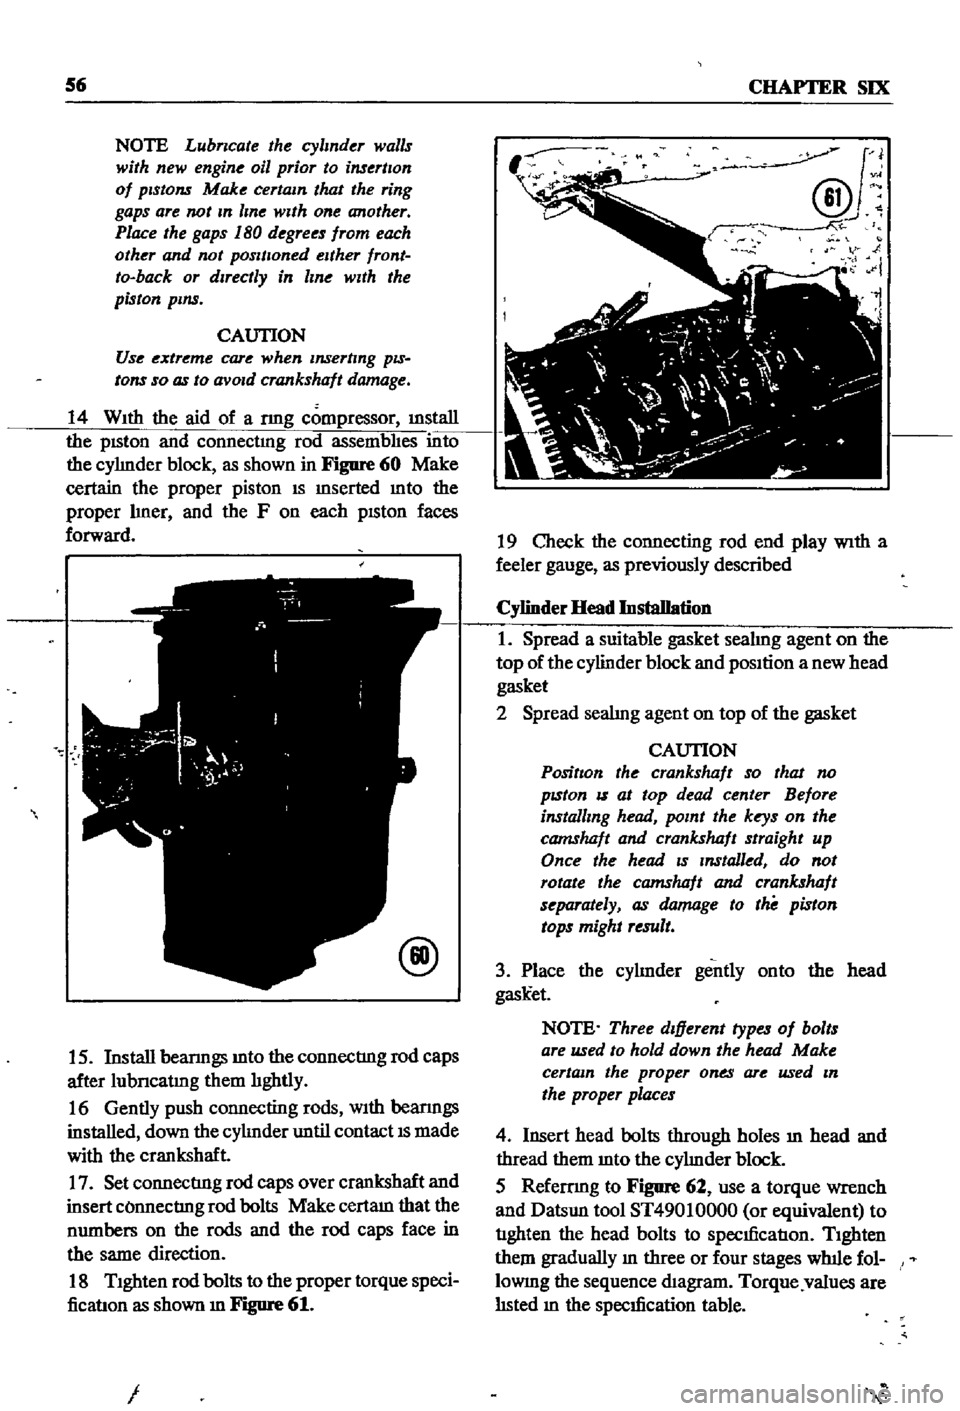 DATSUN 510 1968  Service Repair Manual 
56

CHAPTER 
SIX

NOTE 
Lubncate 
the

cylinder 
walls

with 
new

engine 
oil

prior 
to 
insertIOn

of 
pistOns 
Make

certain 
that 
the

ring

gaps 
are 
not 
In 
line

wIth 
one 
another

Place
